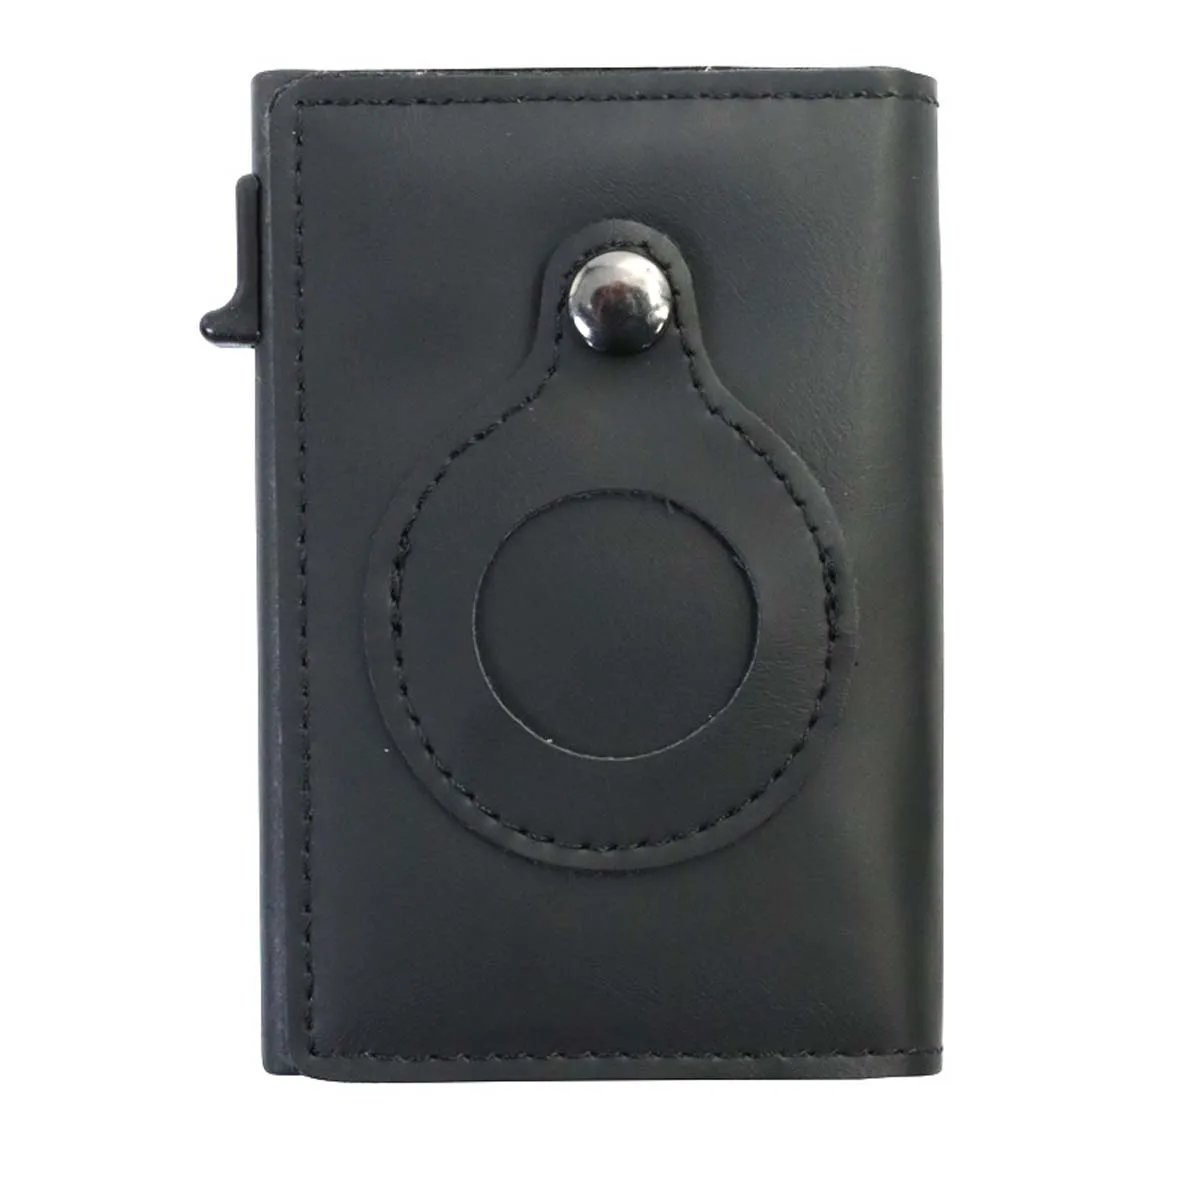 Pop-out RFID Card Holder Slim Aluminum Anti-theft Brush Leather Wallet ID Credit Card Holder Blocking Protect Travel Cardholder